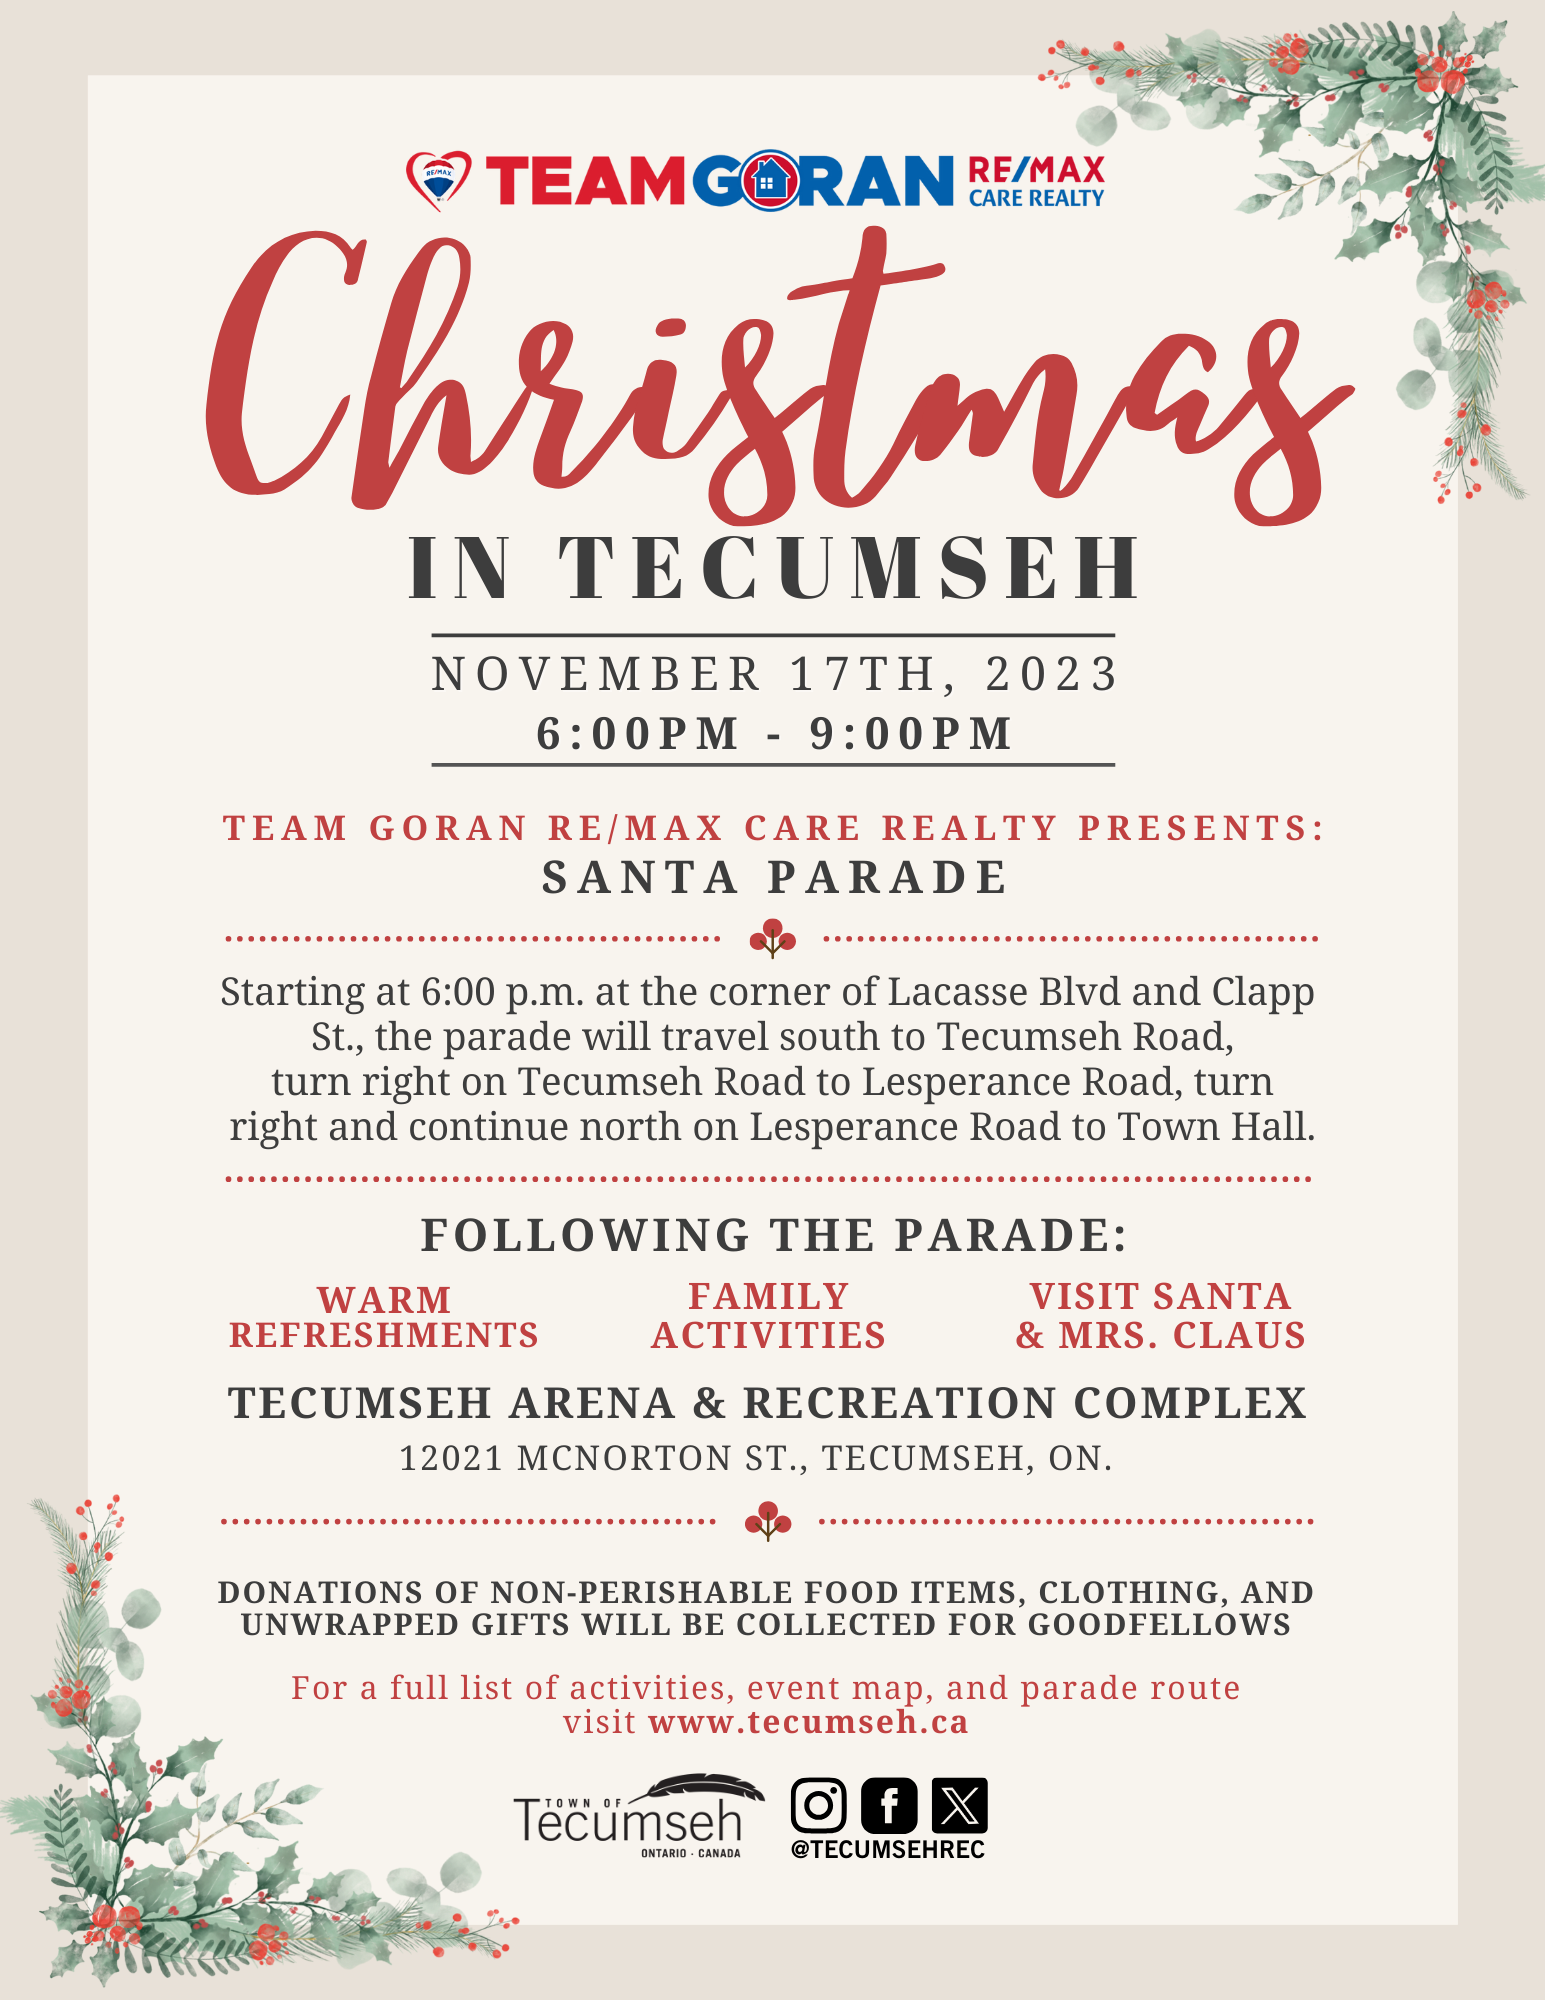 Save the Date November 17th, Christmas in Tecumseh 